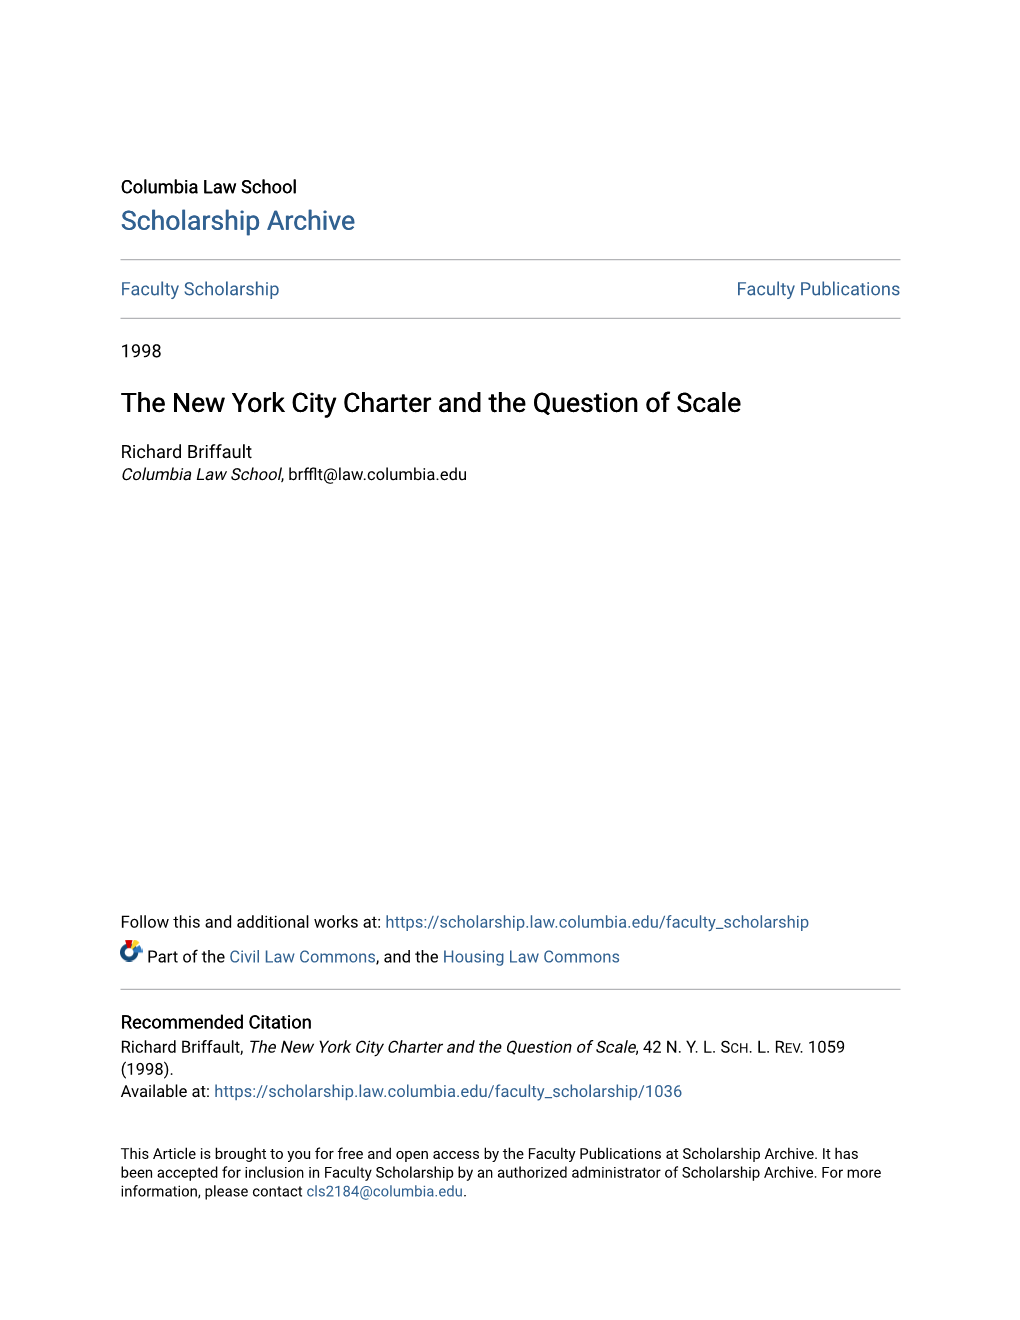 The New York City Charter and the Question of Scale